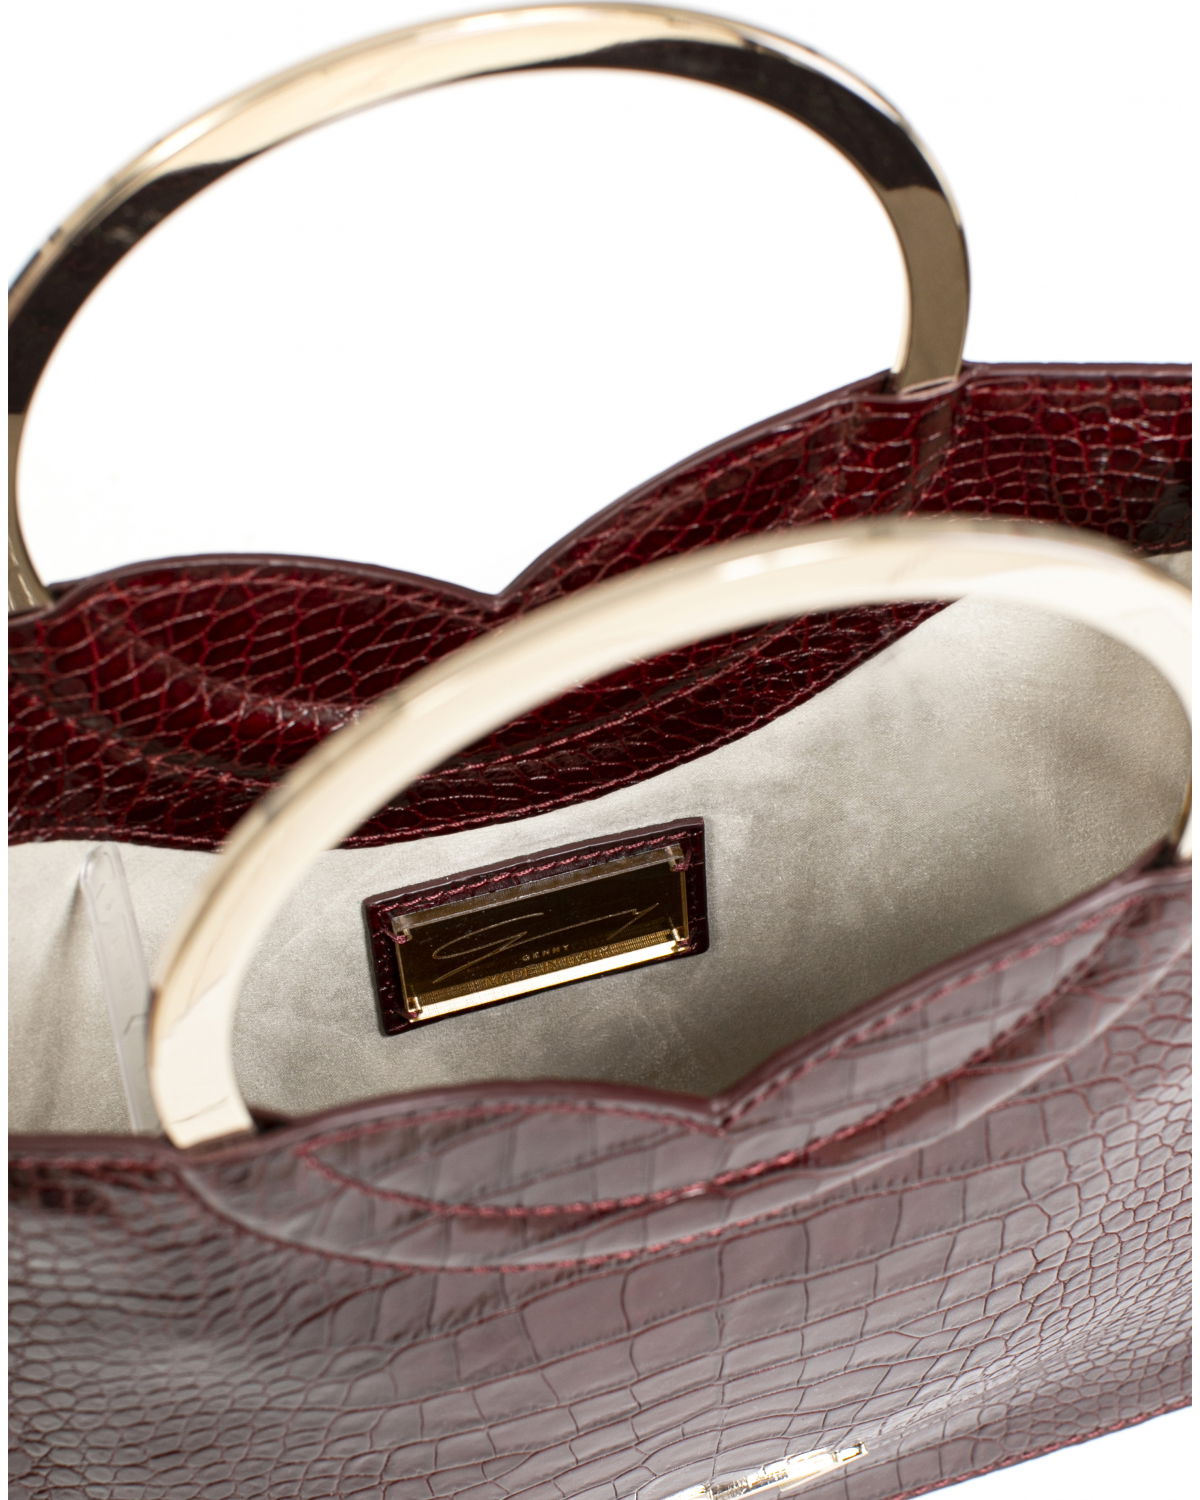 Small square burgundy leather bag with round metal handles | -40% | Genny